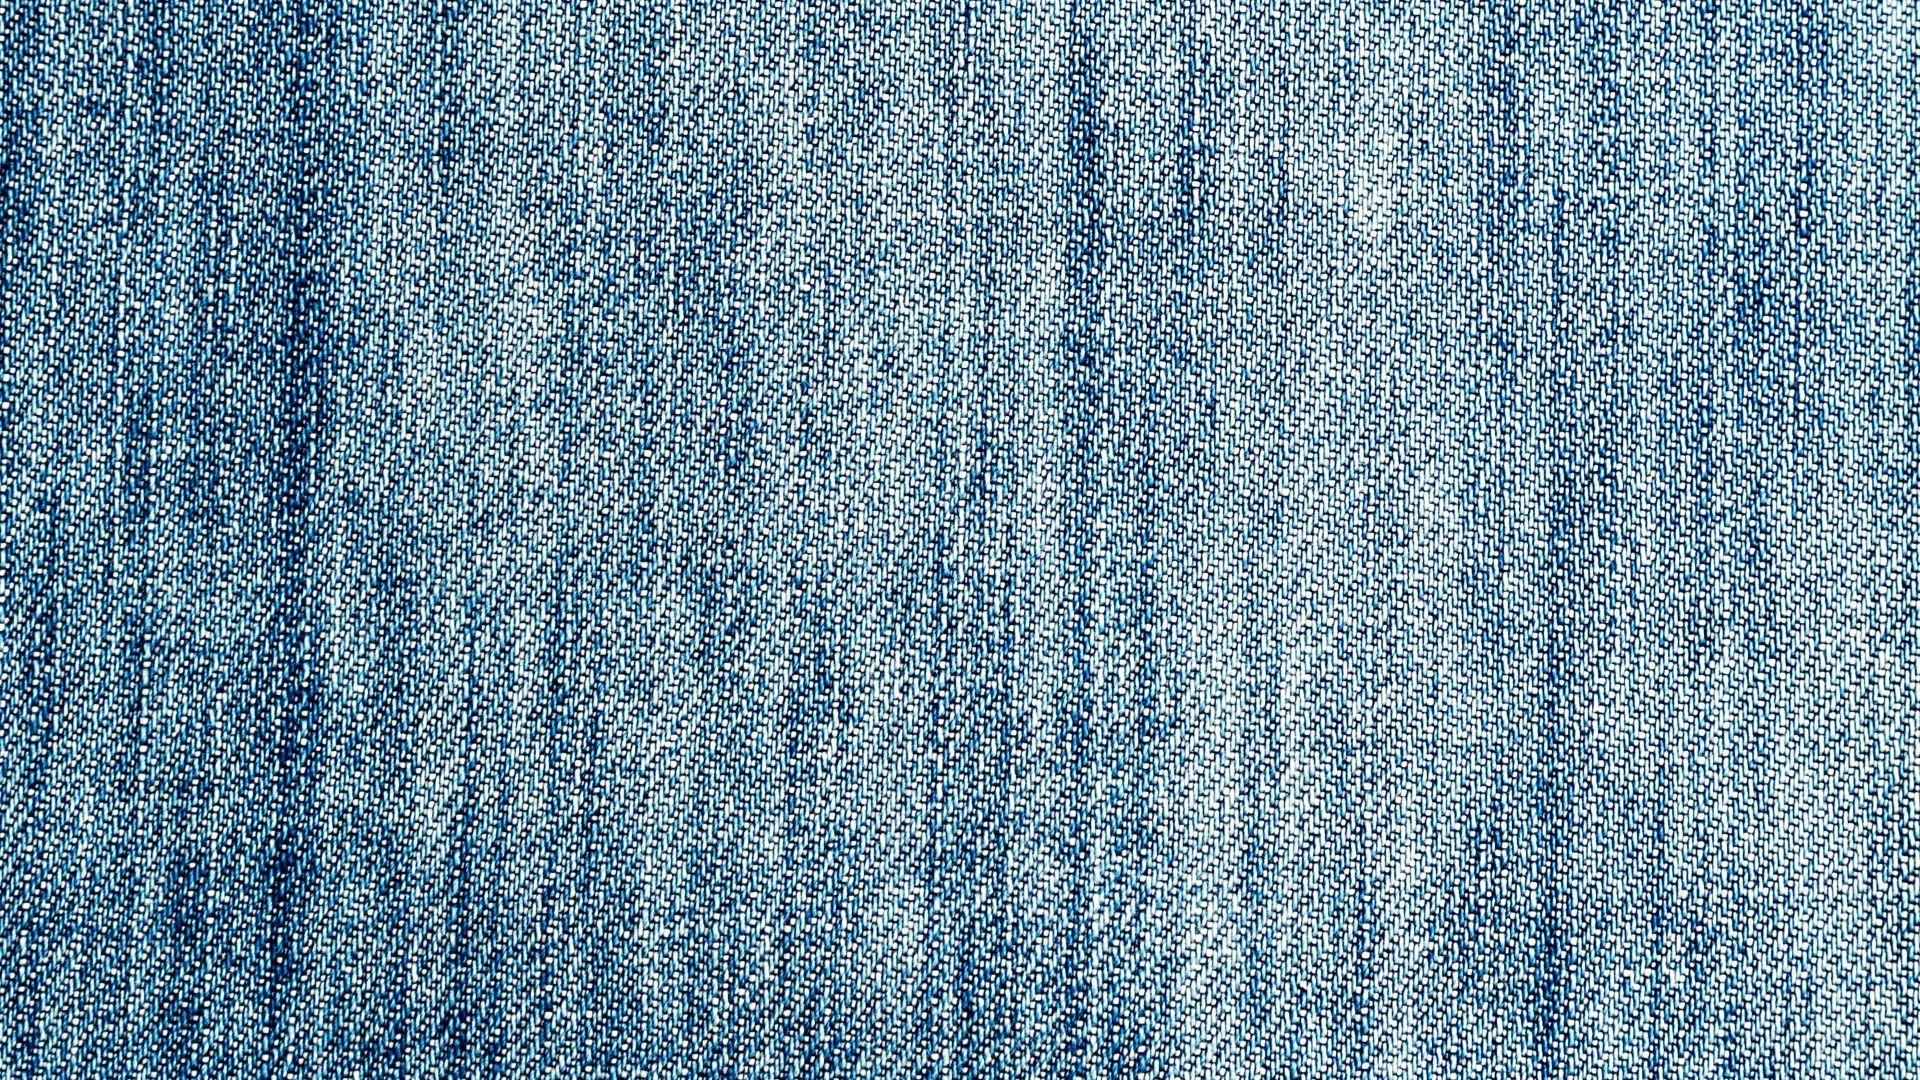 Jeans Wallpapers